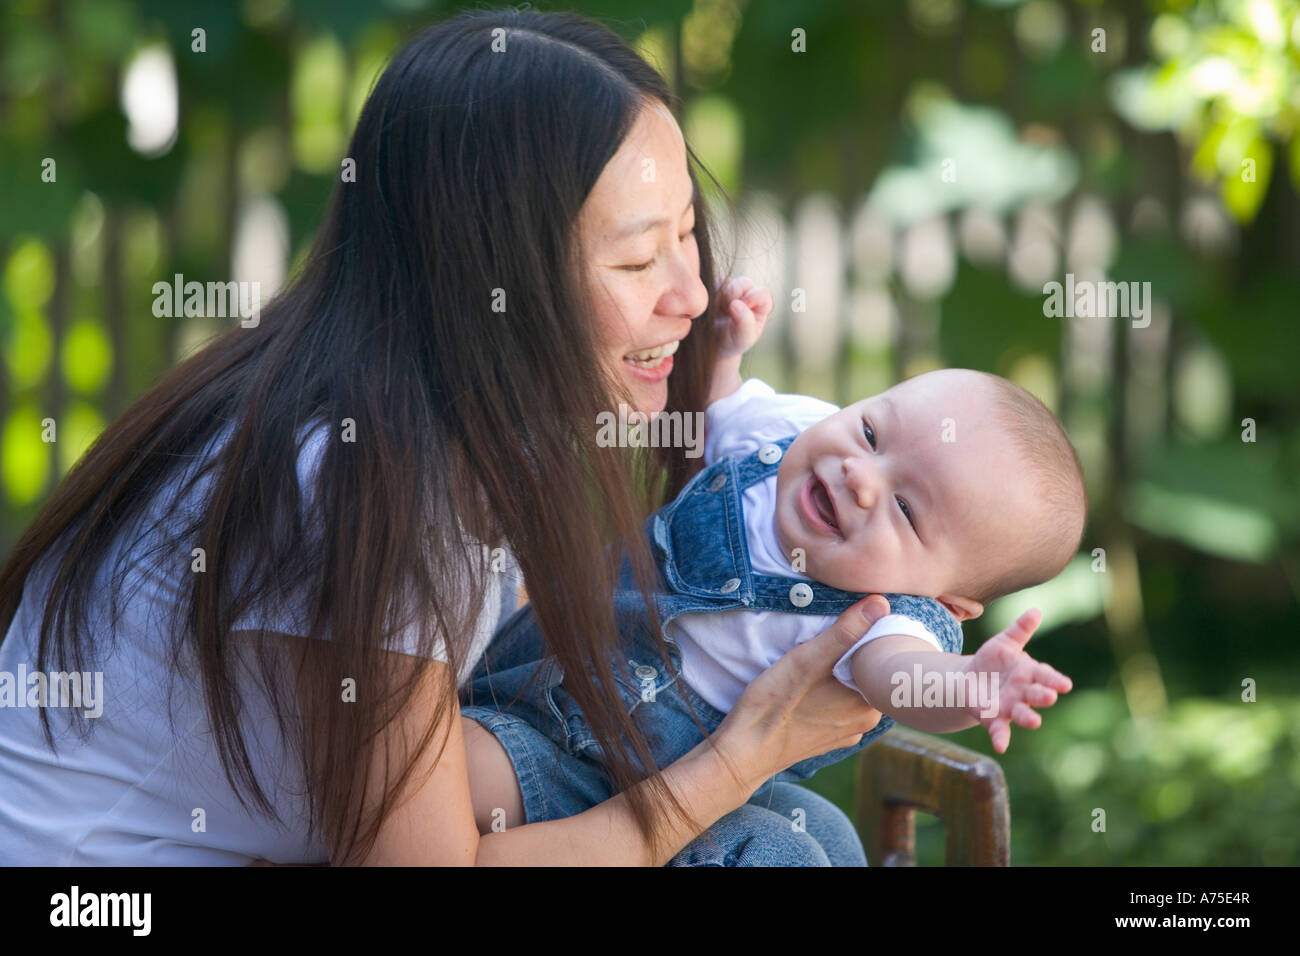 Mother and Baby smiling and interacting Stock Photo